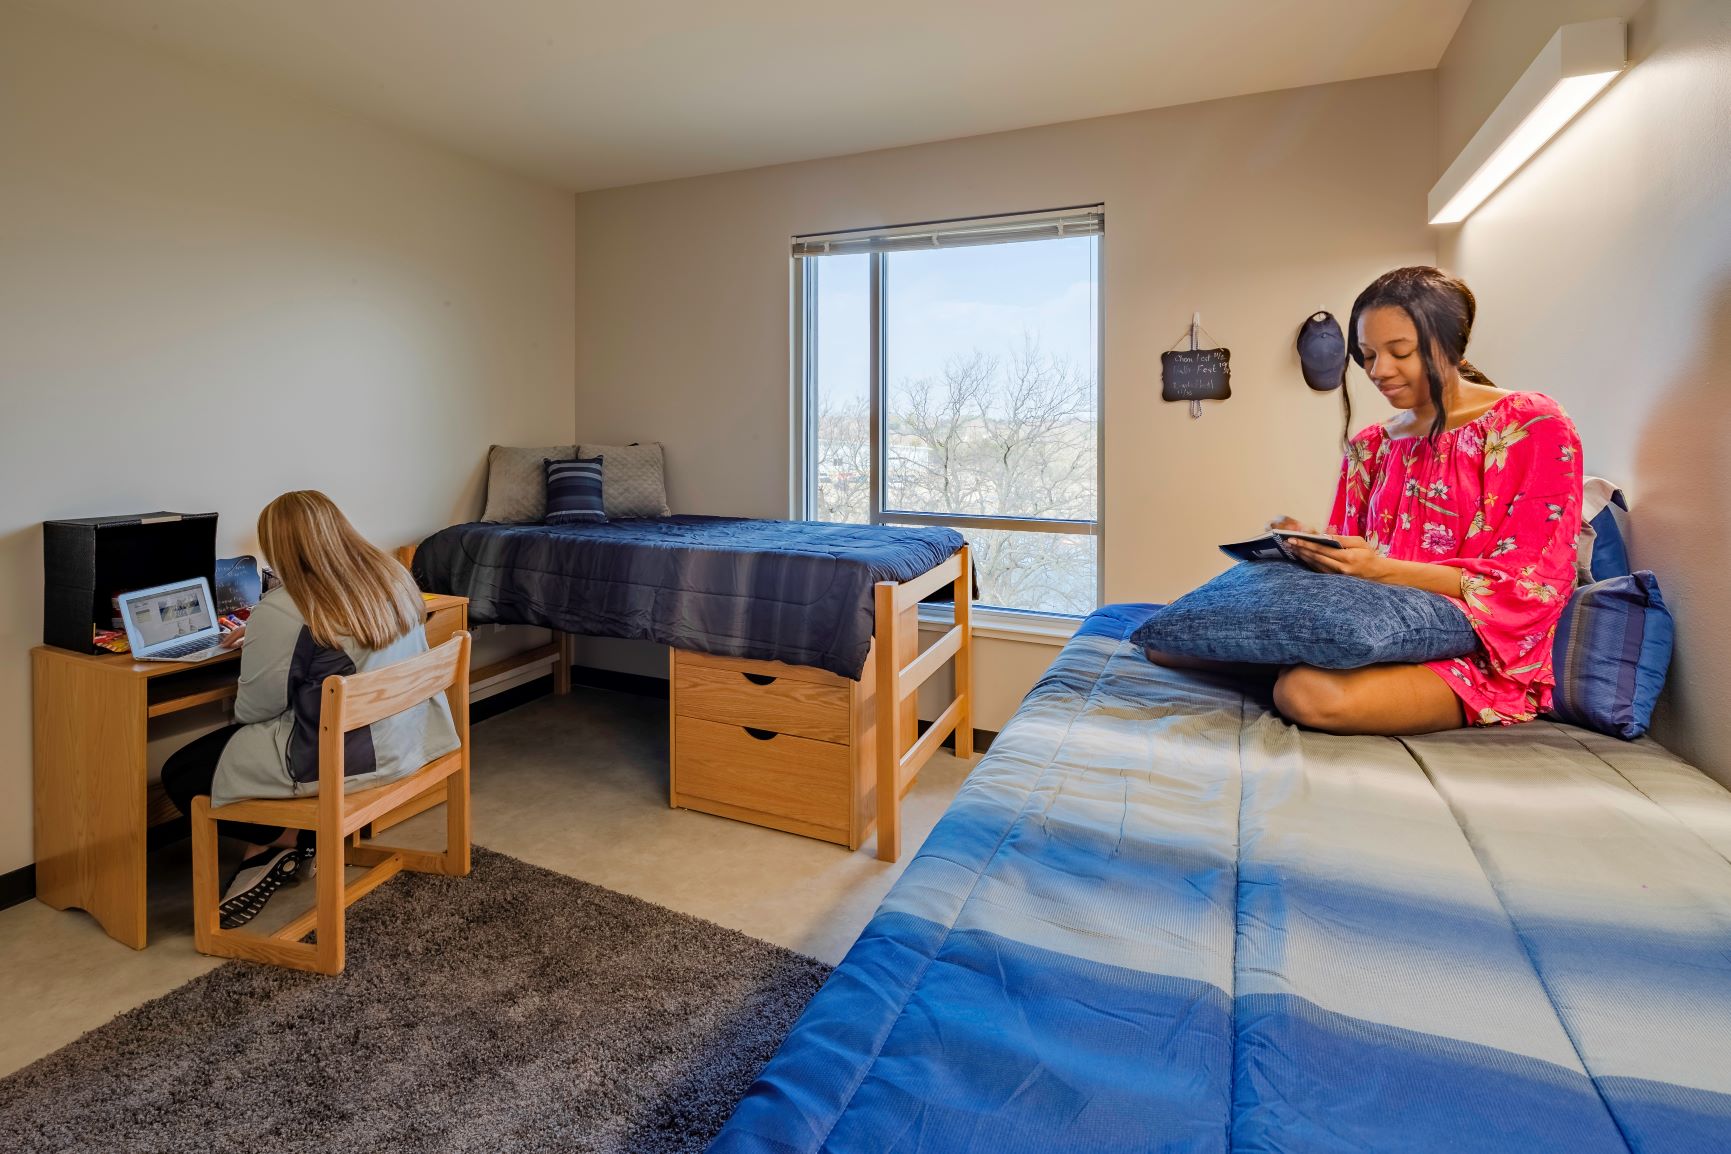 Inside of residence hall room with 2 students studying, from different angle